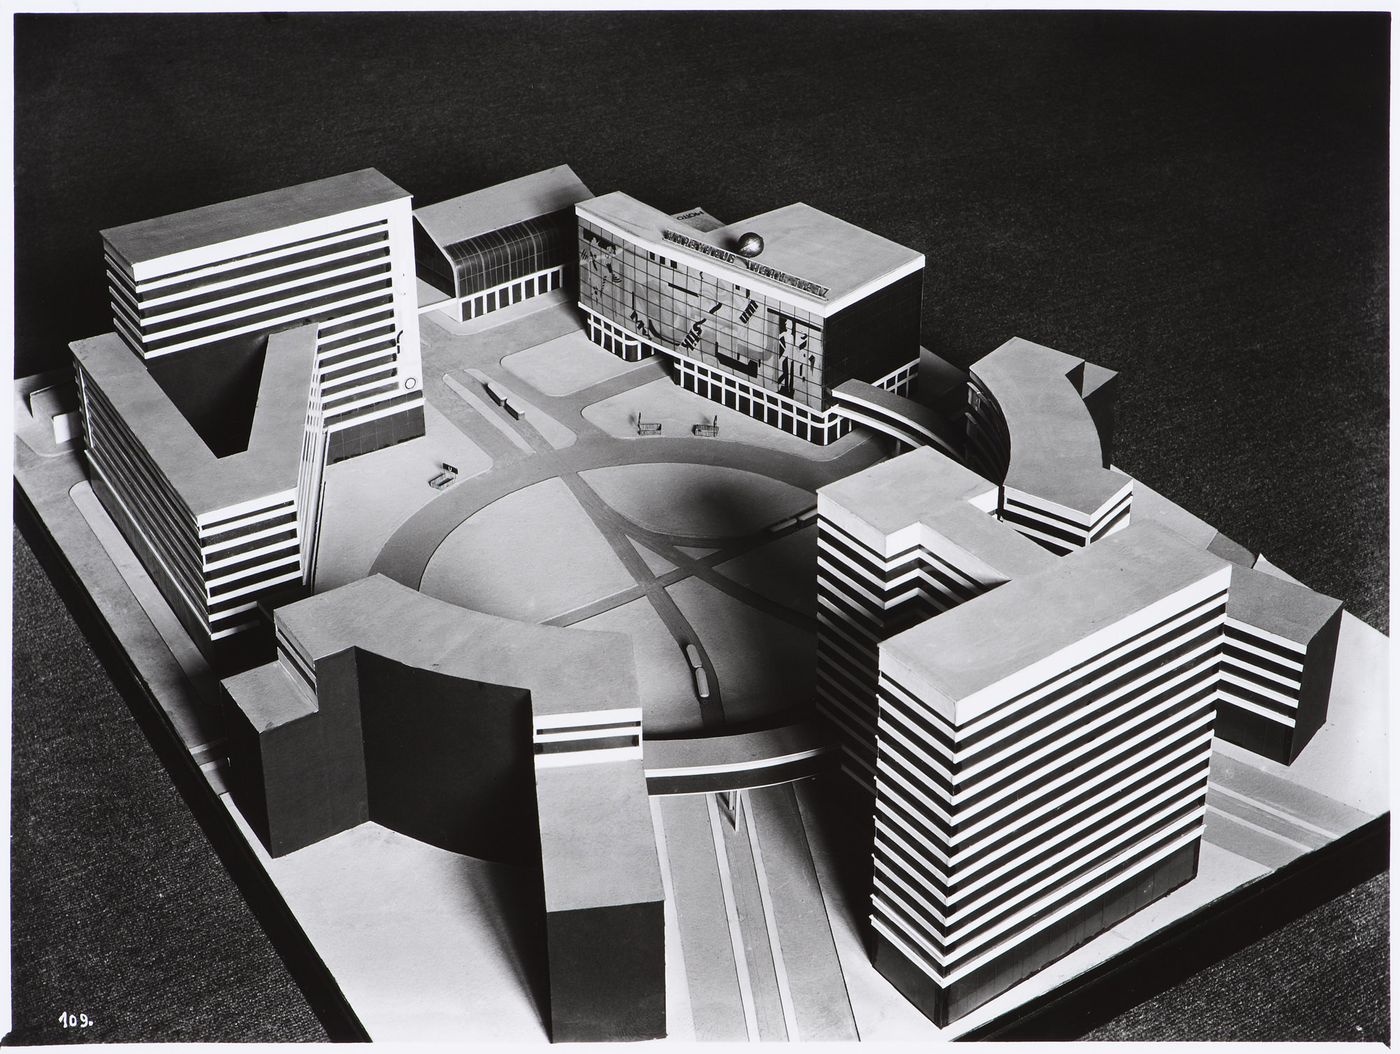 Photograph of a model designed for the competition for the urban renewal of Alexanderplatz 1928-1929, Berlin